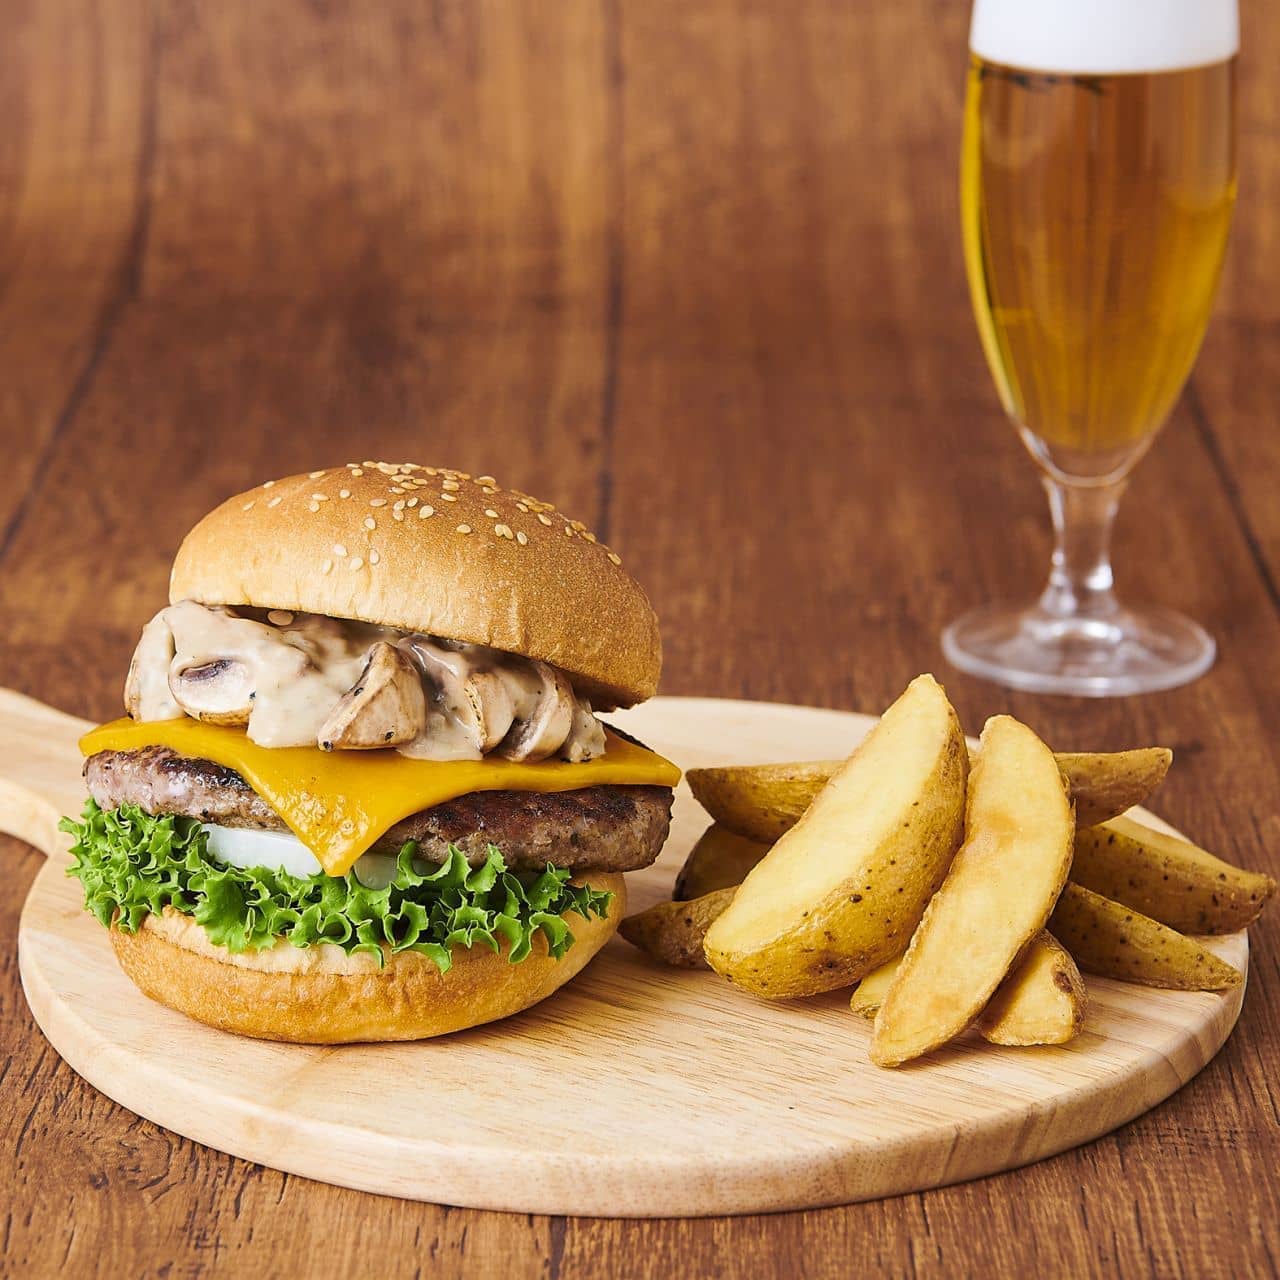 Freshness Burger "Asahi Draft Beer (commonly known as Maruev)" is now available